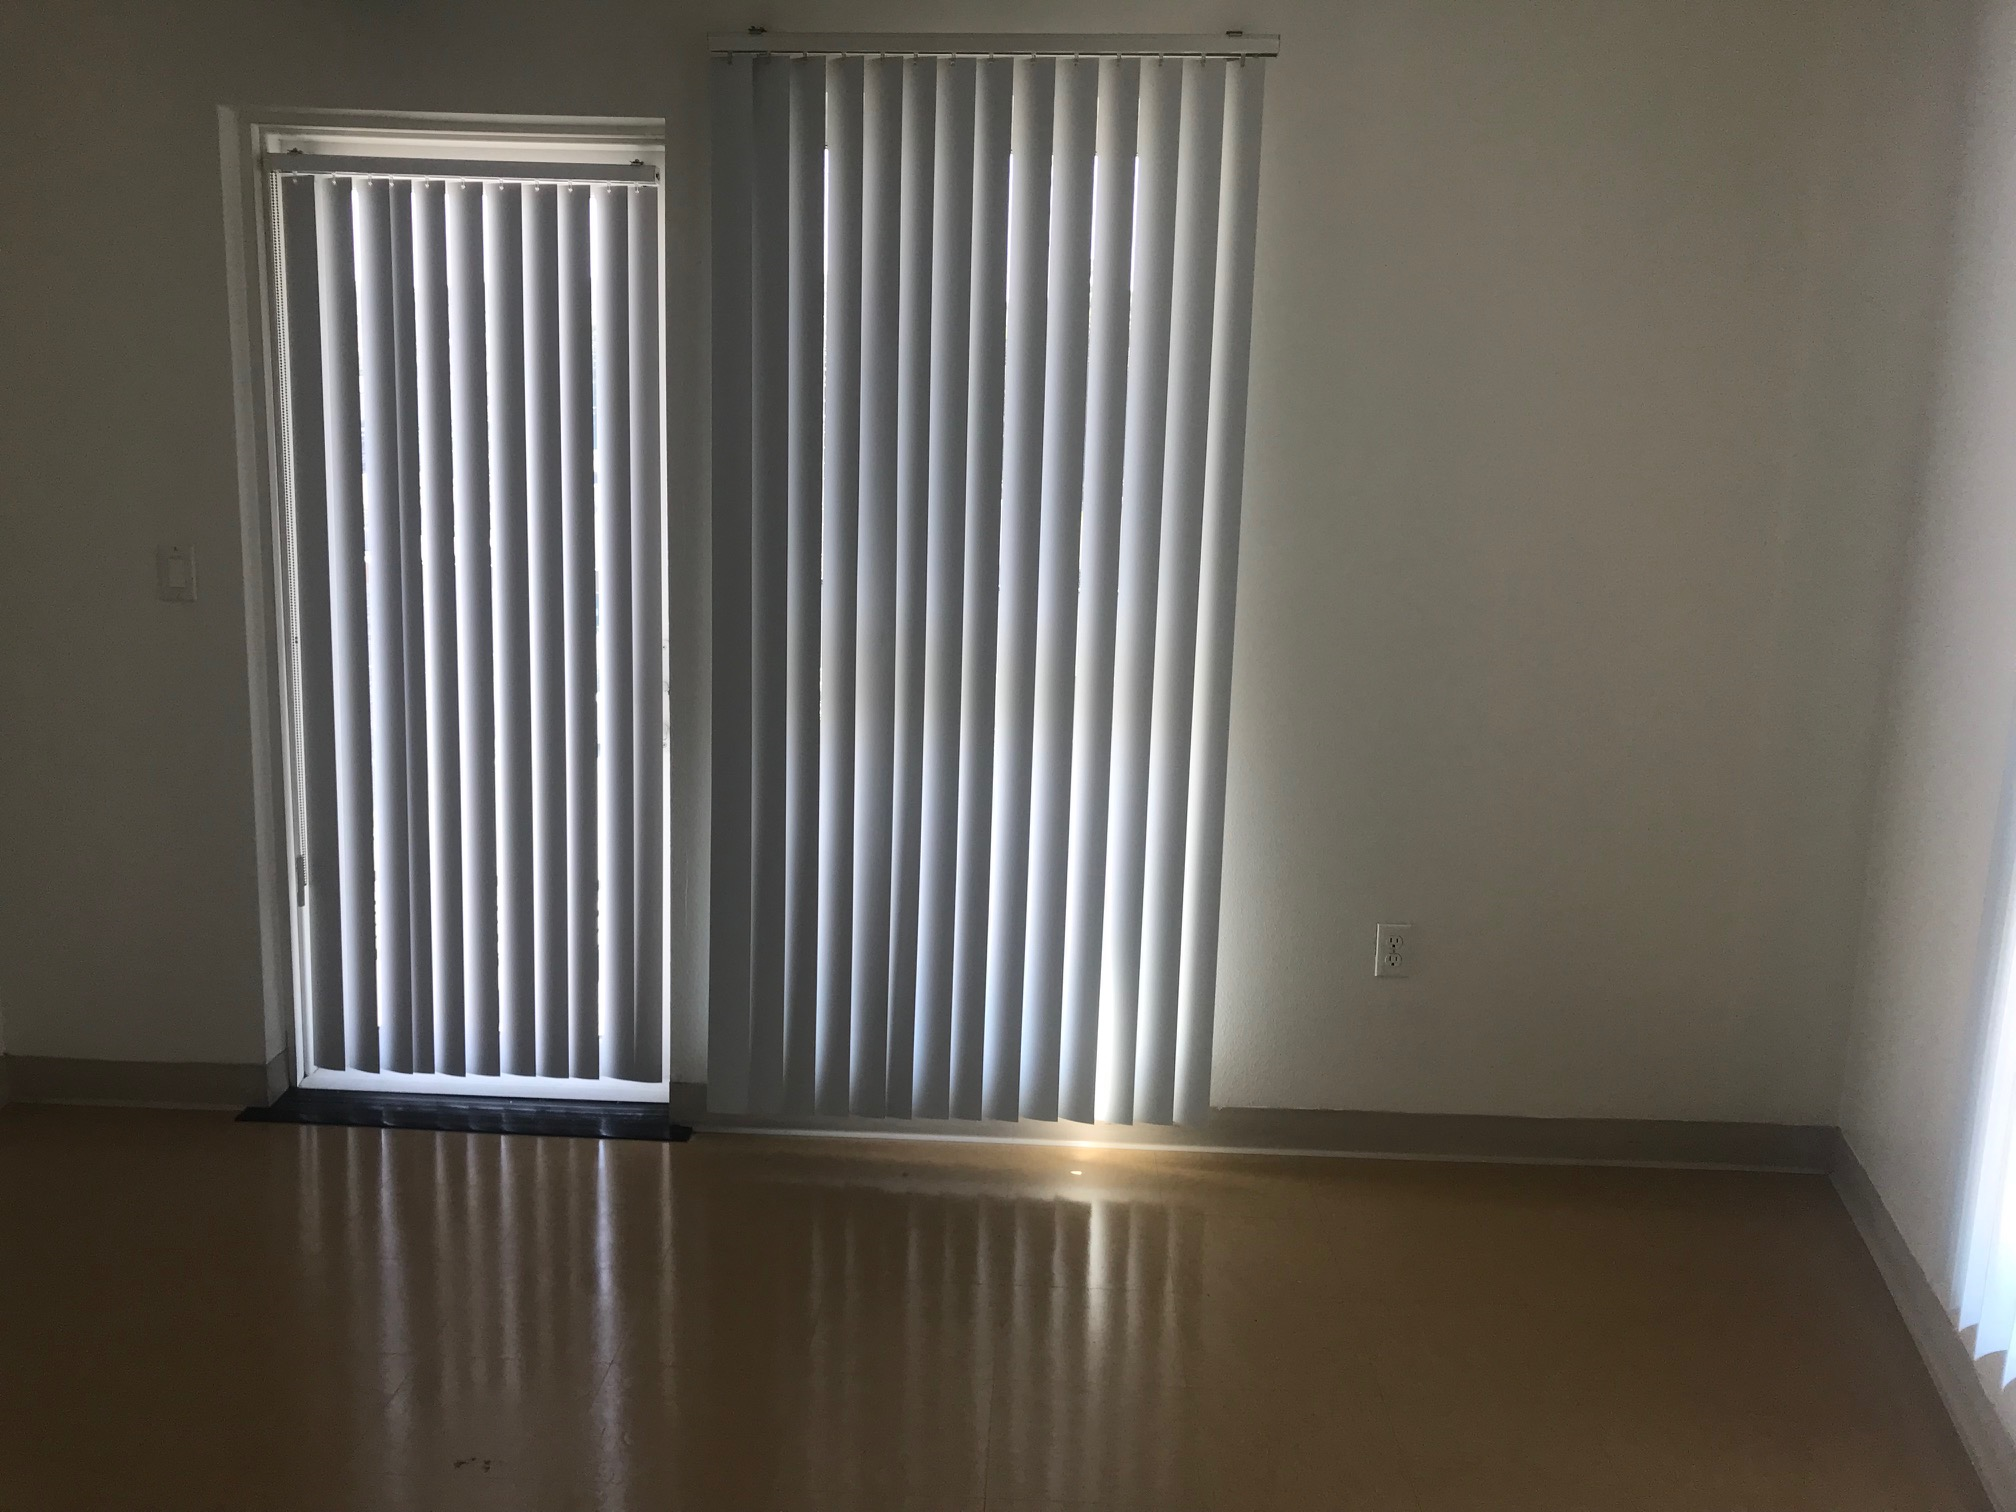 Interior view of a bedroom. Floors are tiled and there are two large horizontal blinds covering two windows.